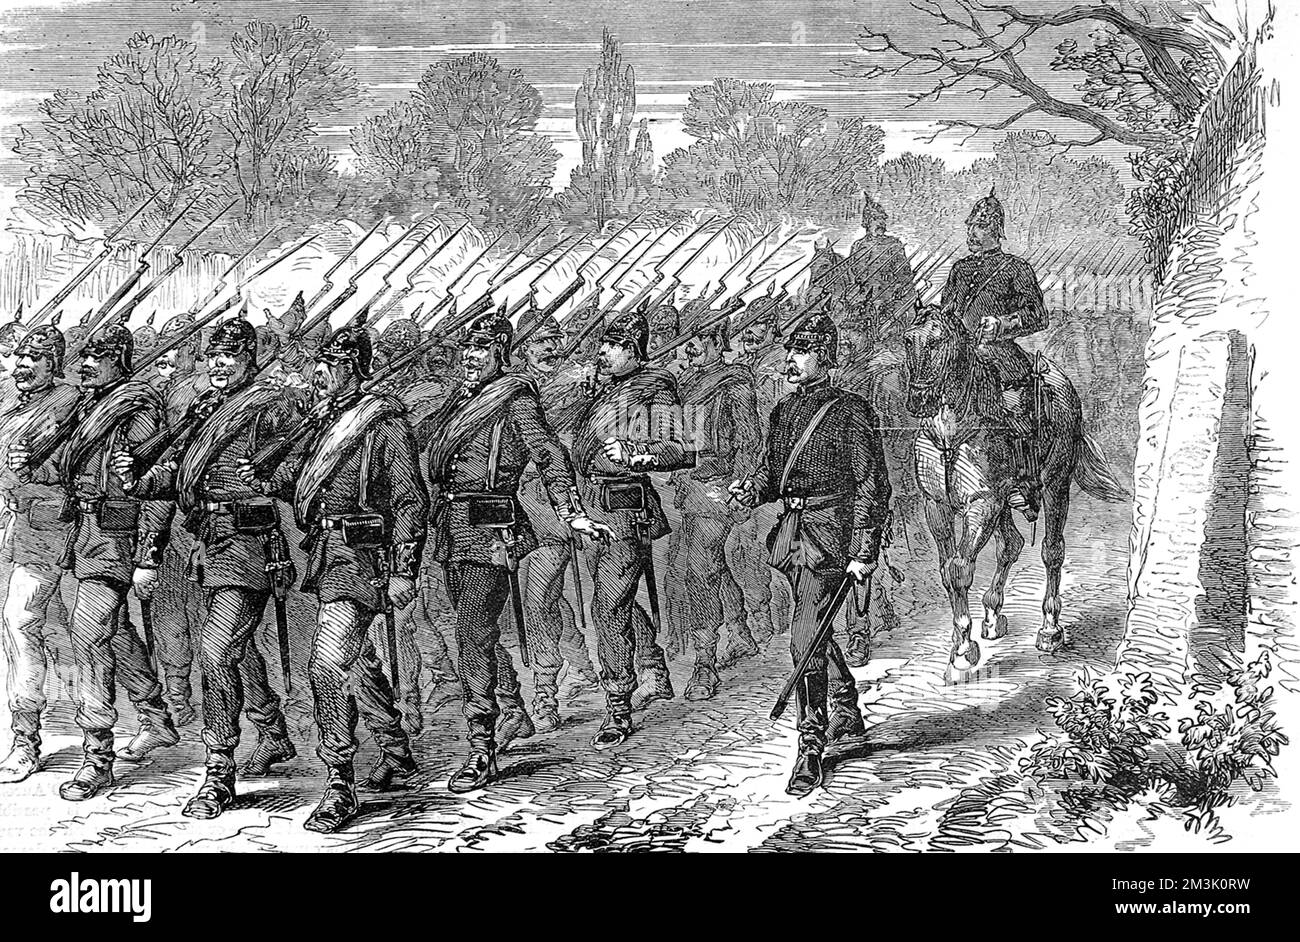 The 24th Prussian Regiment returning from battle during the Siege of Paris in the winter of 1870-1. As can be seen in this image, the ranks of Prussian troops were well armed and highly disciplined. Stock Photo